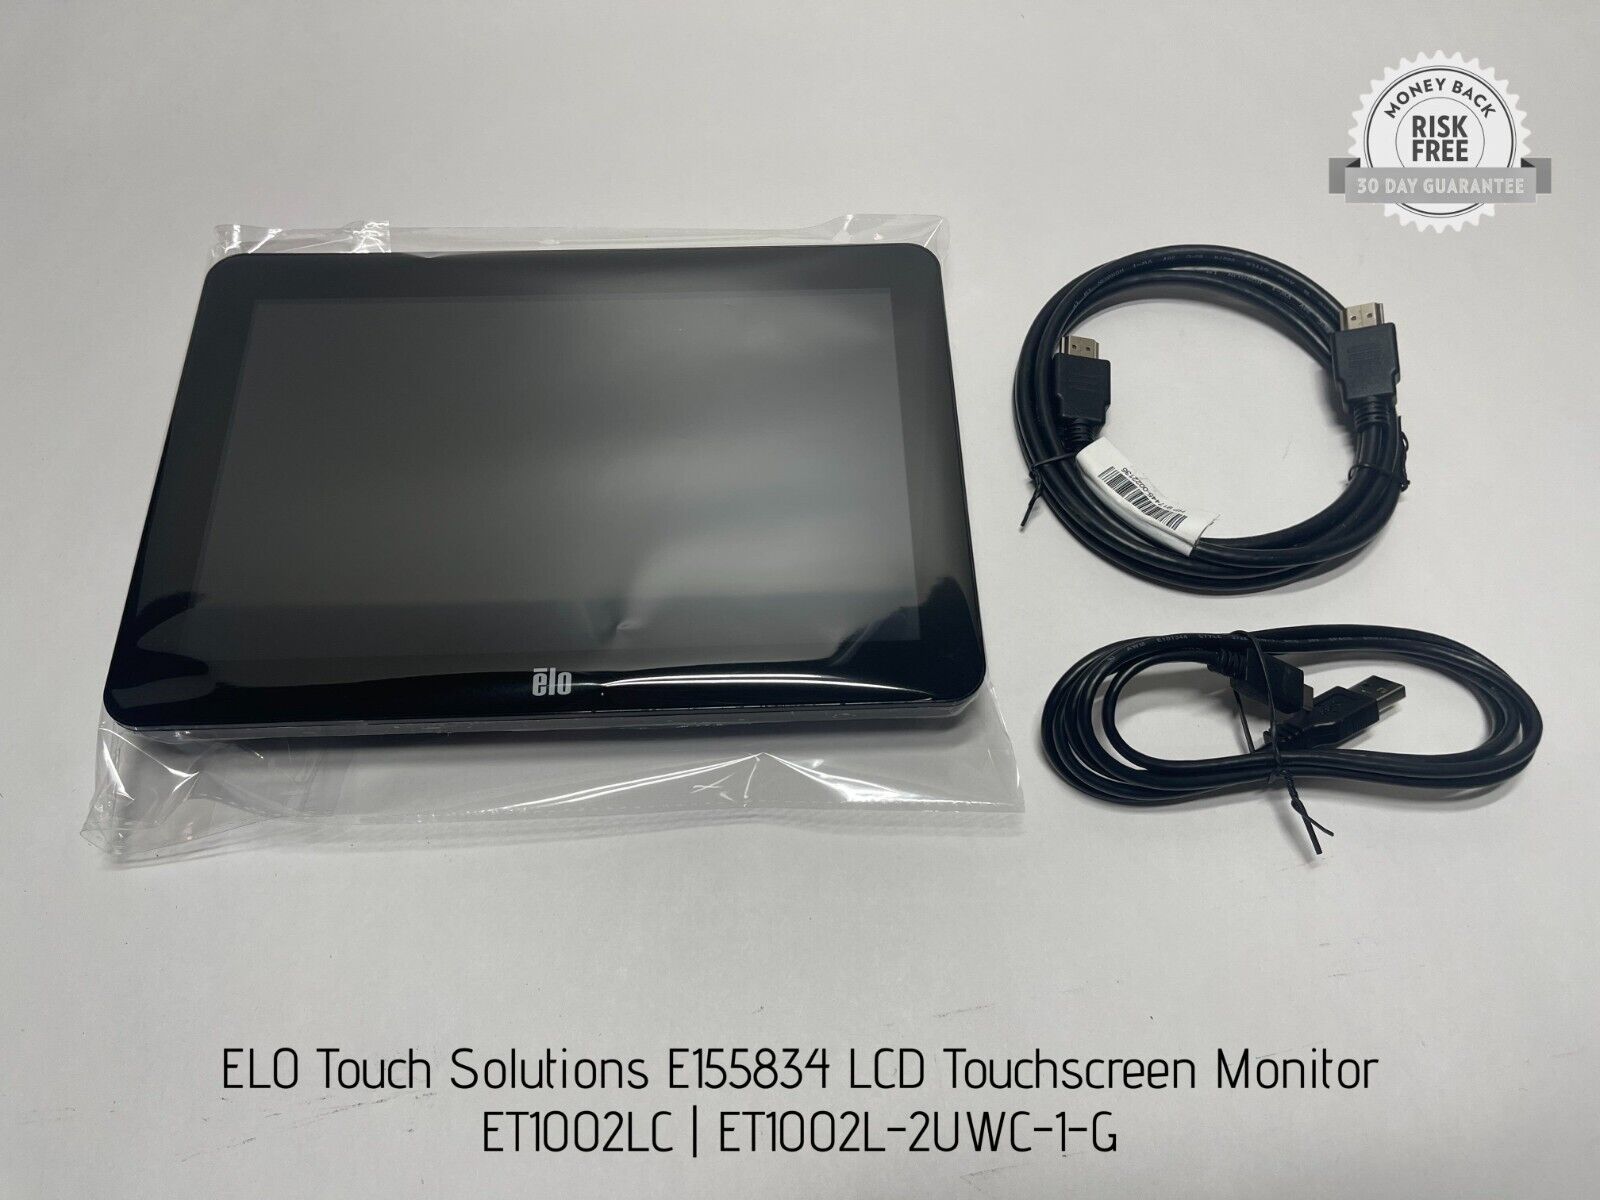 ELO Touch Solutions E155834 LCD Touchscreen Monitor, ET1002LC, ET1002L-2UWC-1-G